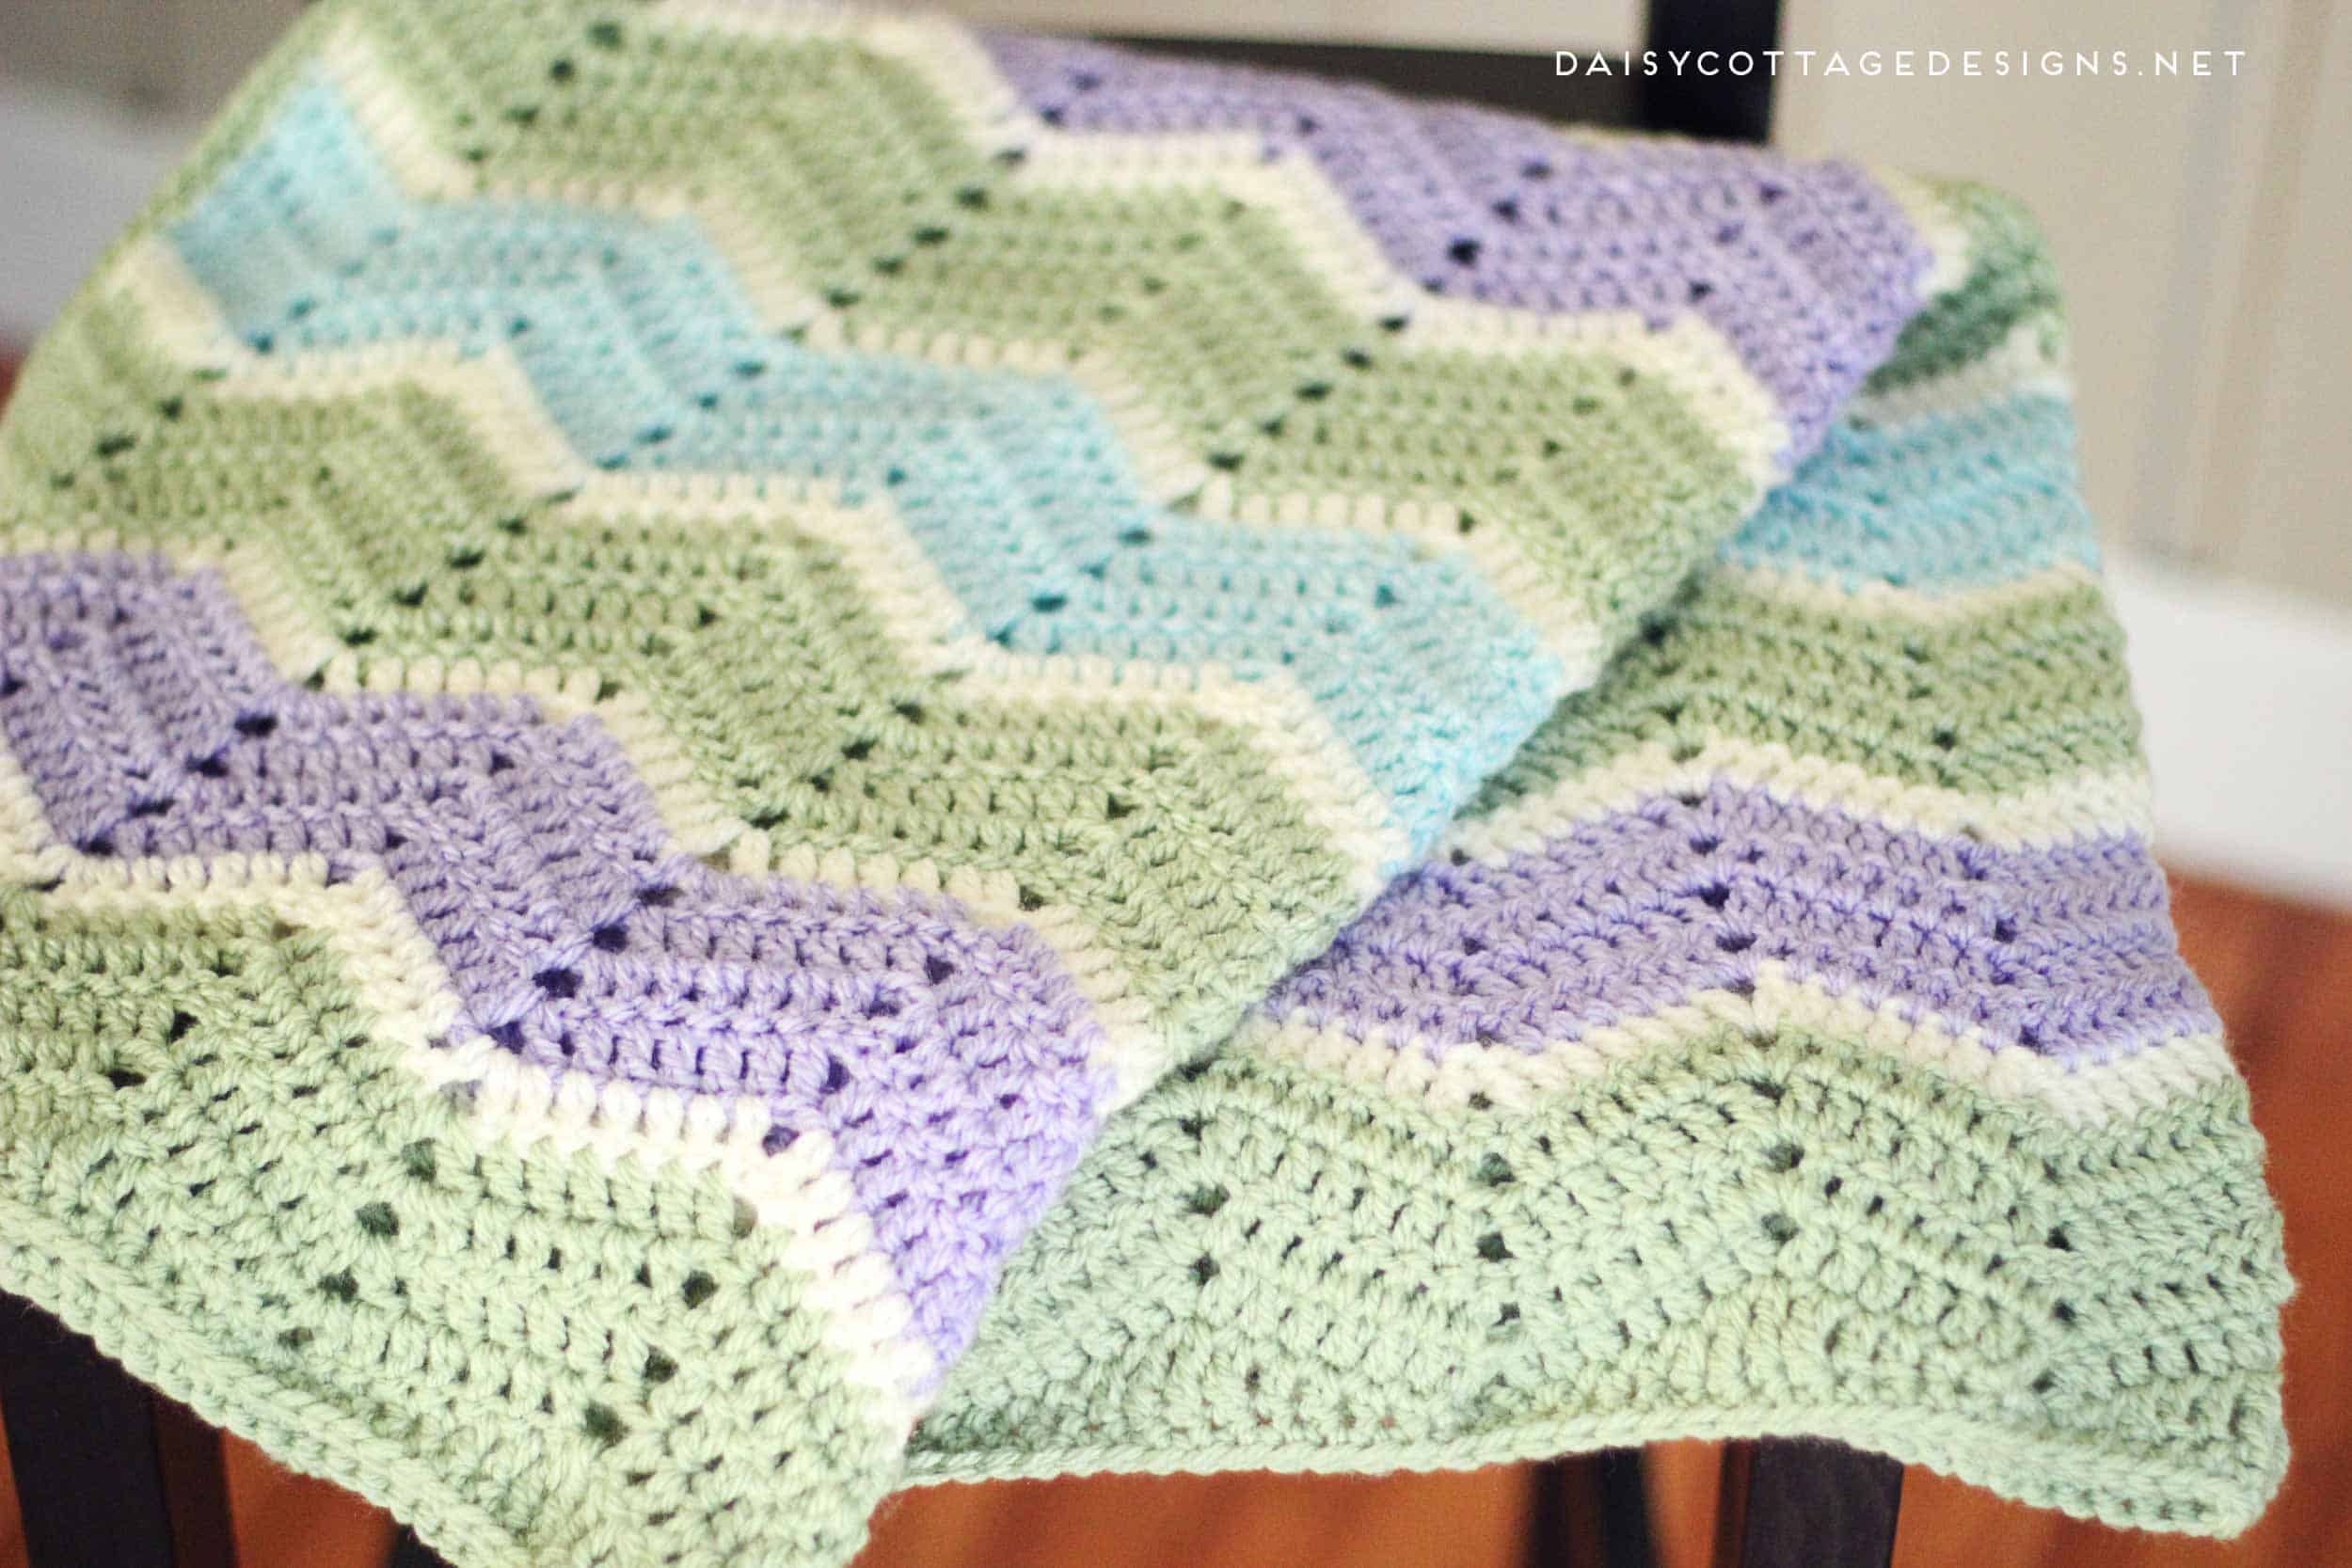 Use this chevron blanket crochet pattern from Daisy Cottage Designs to create beautiful baby blankets and afghans. | Free crochet pattern, easy crochet pattern, blanket crochet pattern, crochet baby blanket, striped baby blanket crochet, crochet blanket pattern, free crochet, easy crochet 